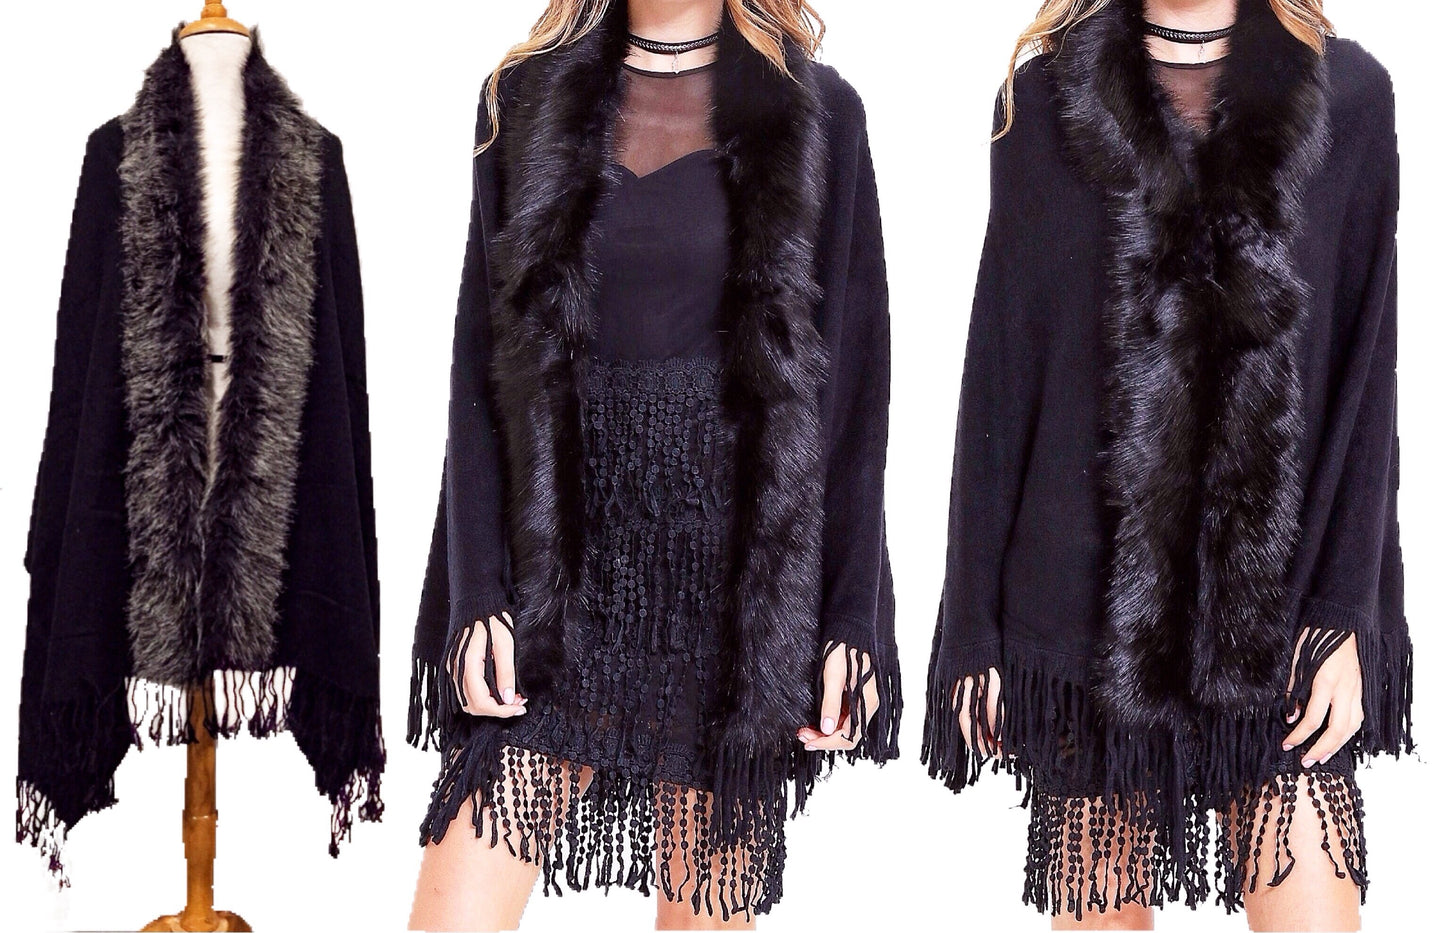 Oversize Scarf or Shawl with Tassels & Fur Collar